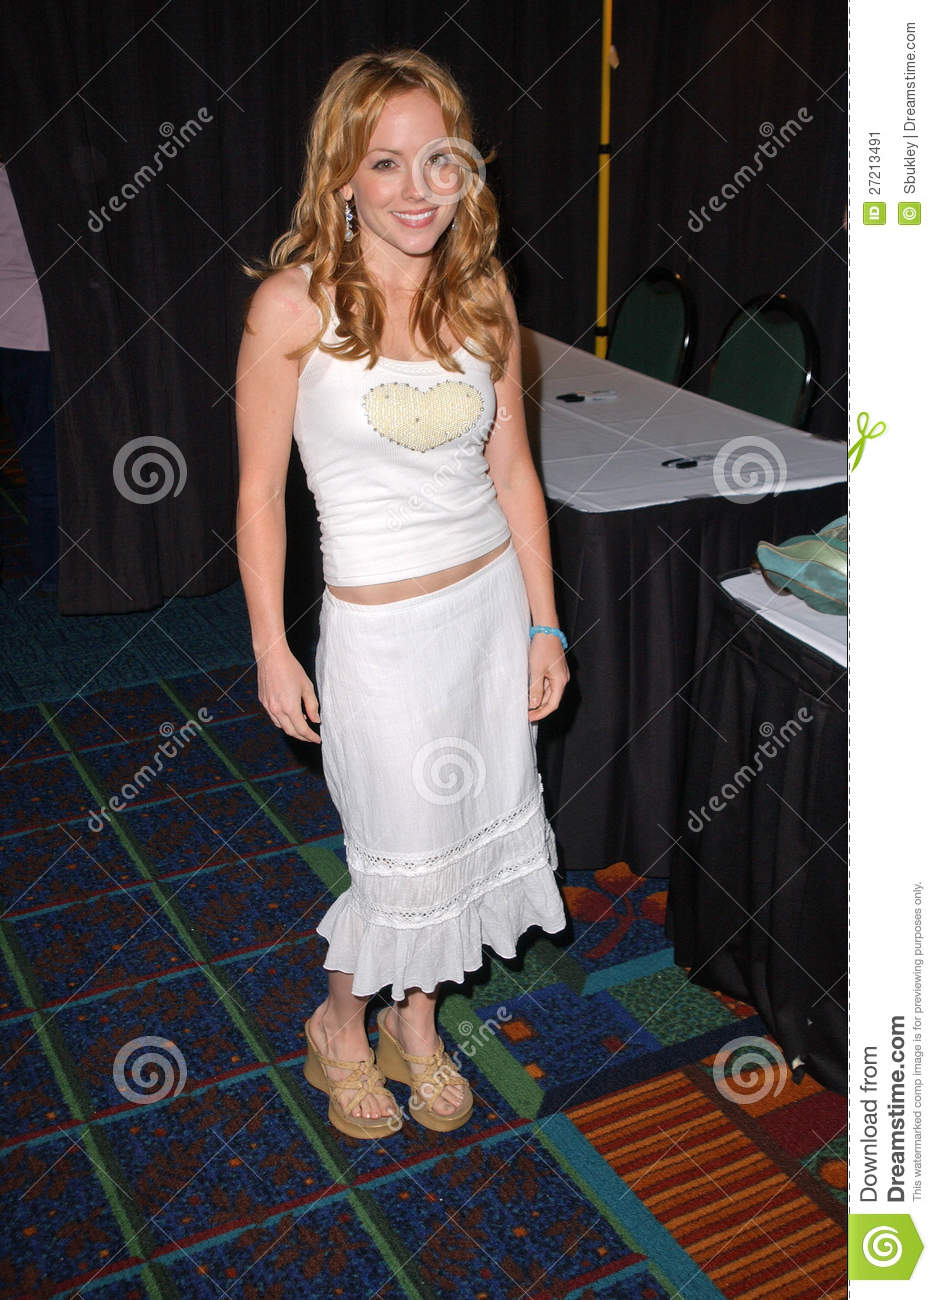 kelly-stables-scandal